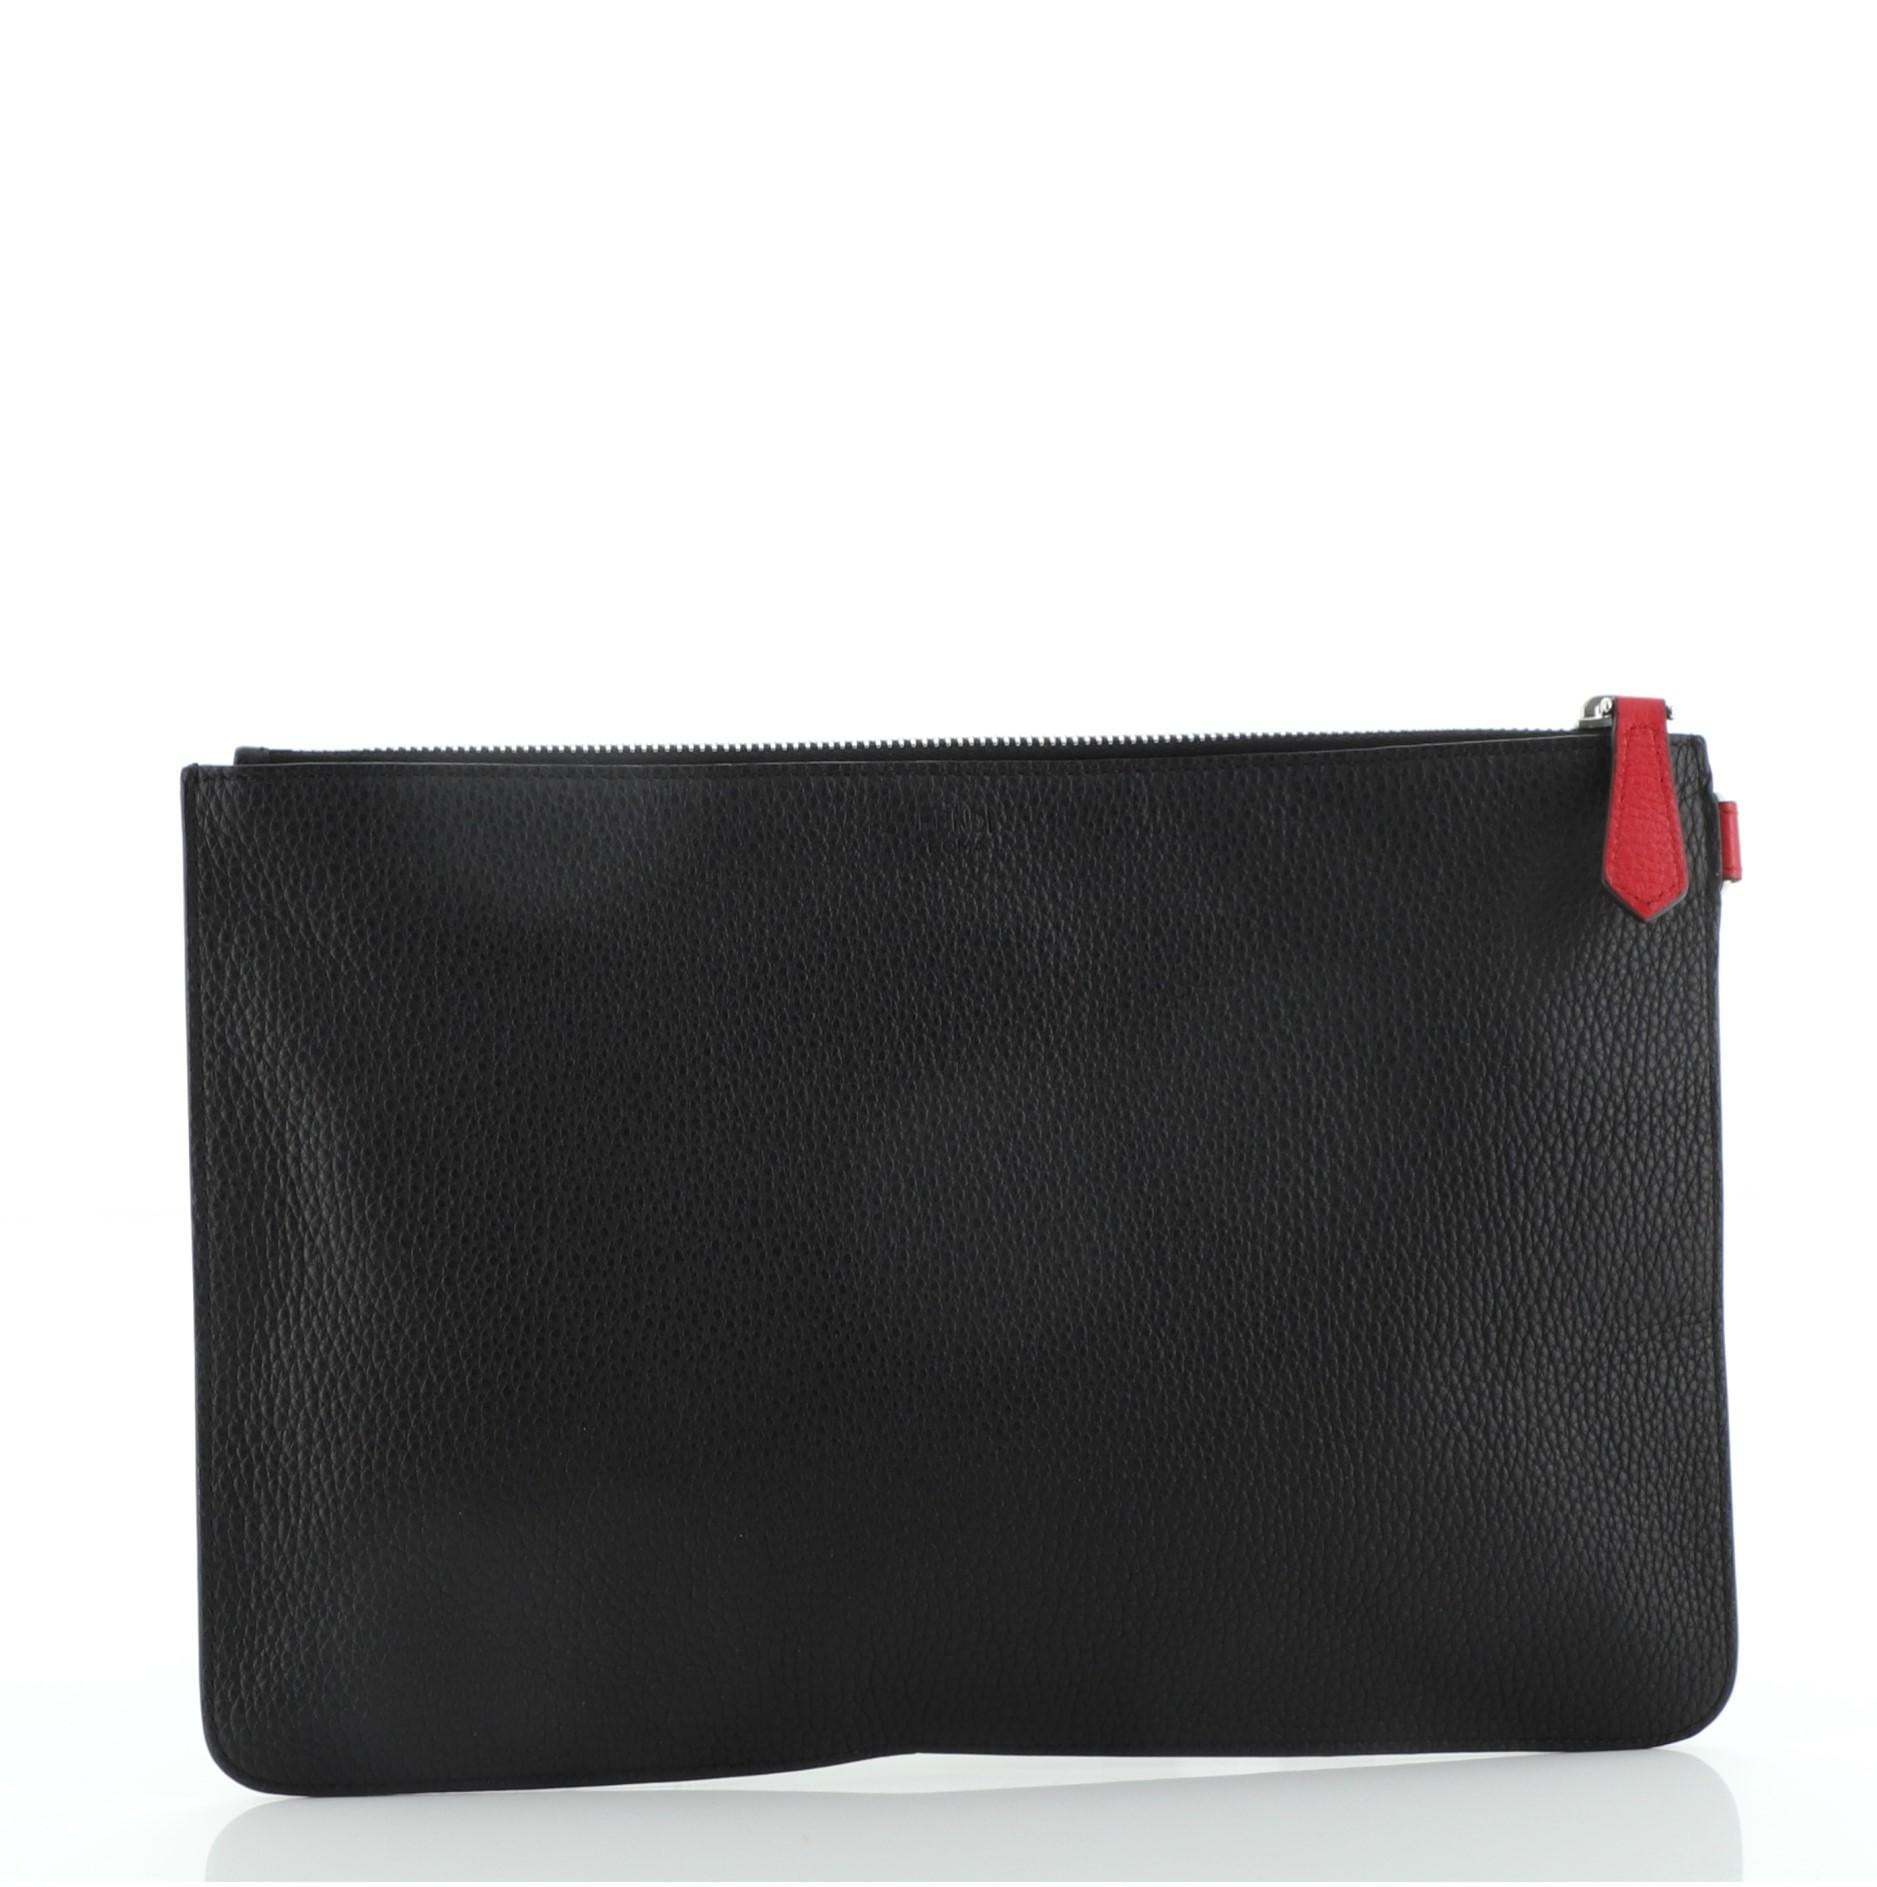 Fendi Jokarl Pouch Printed Leather Medium
Black

Condition Details: Marks and wear on front leather applique, scratches on hardware.

51835MSC

Height 8